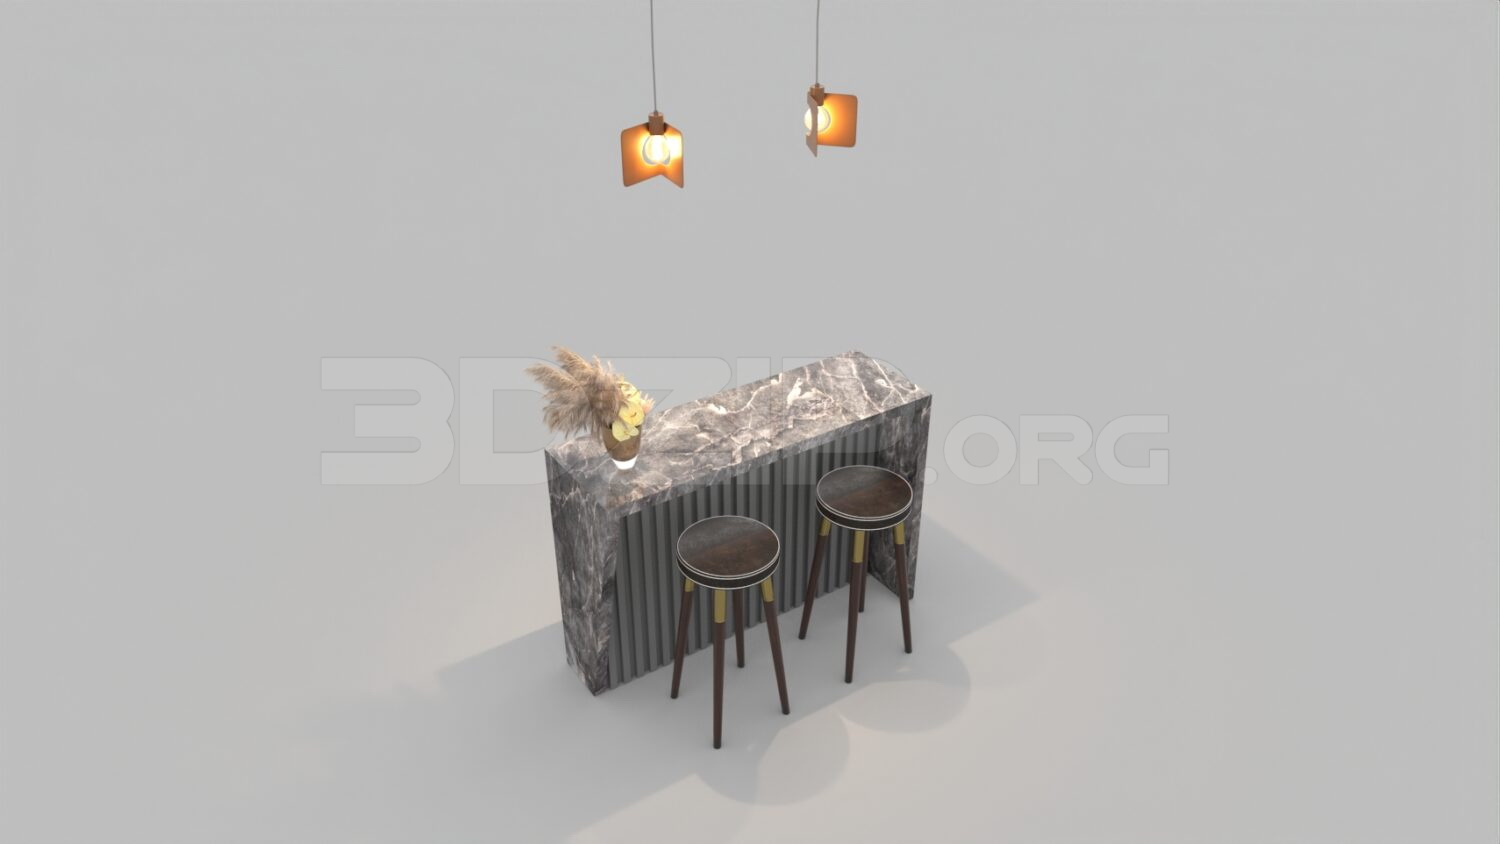 2423. Download Free Table Model By Quang Truong